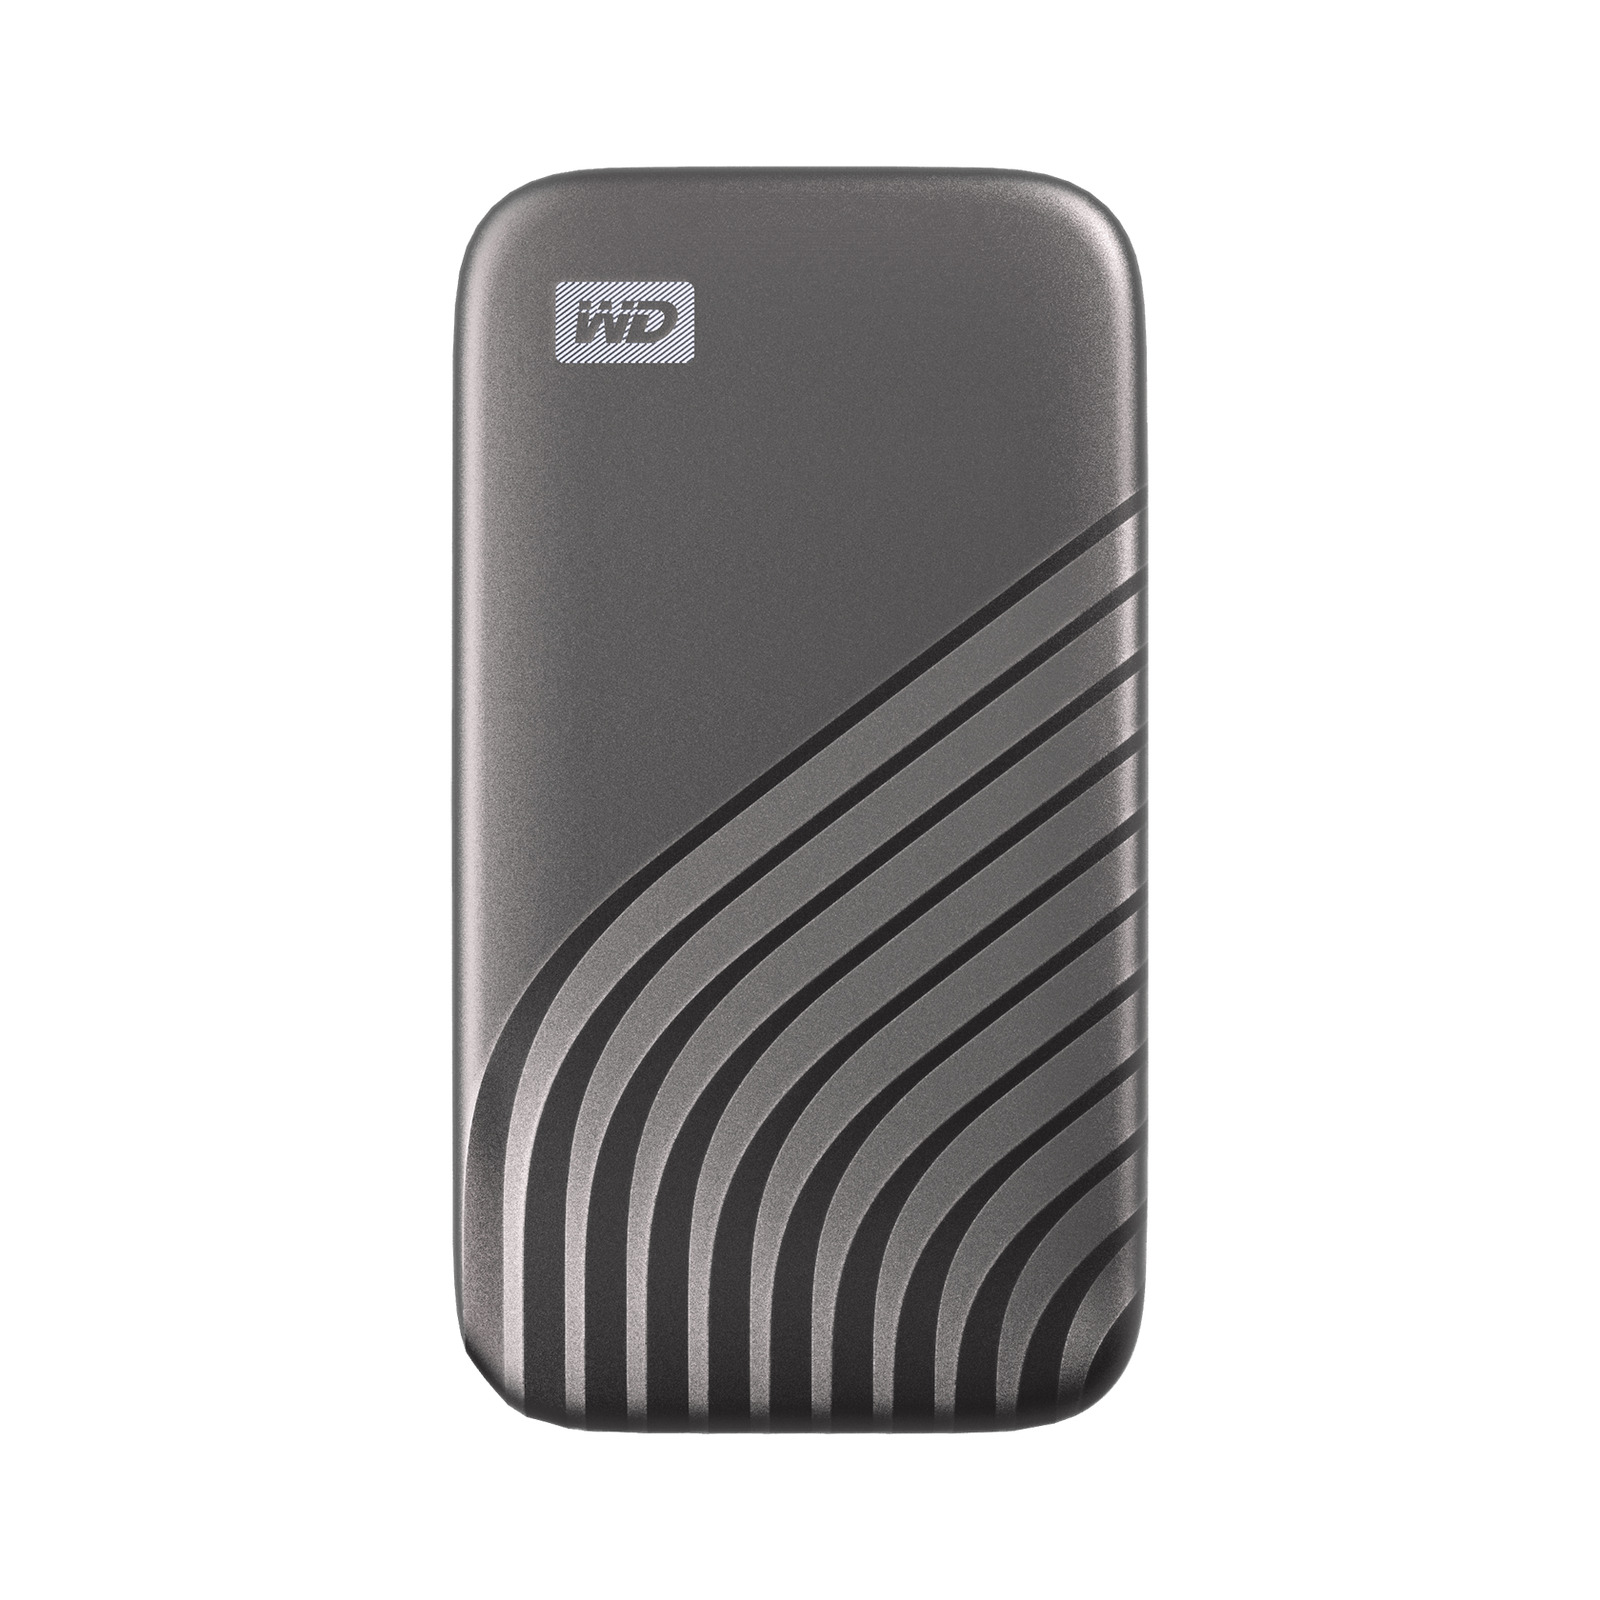 WD 2TB My Passport SSD, Portable External Solid State Drive - WDBAGF0020BGY-WESN